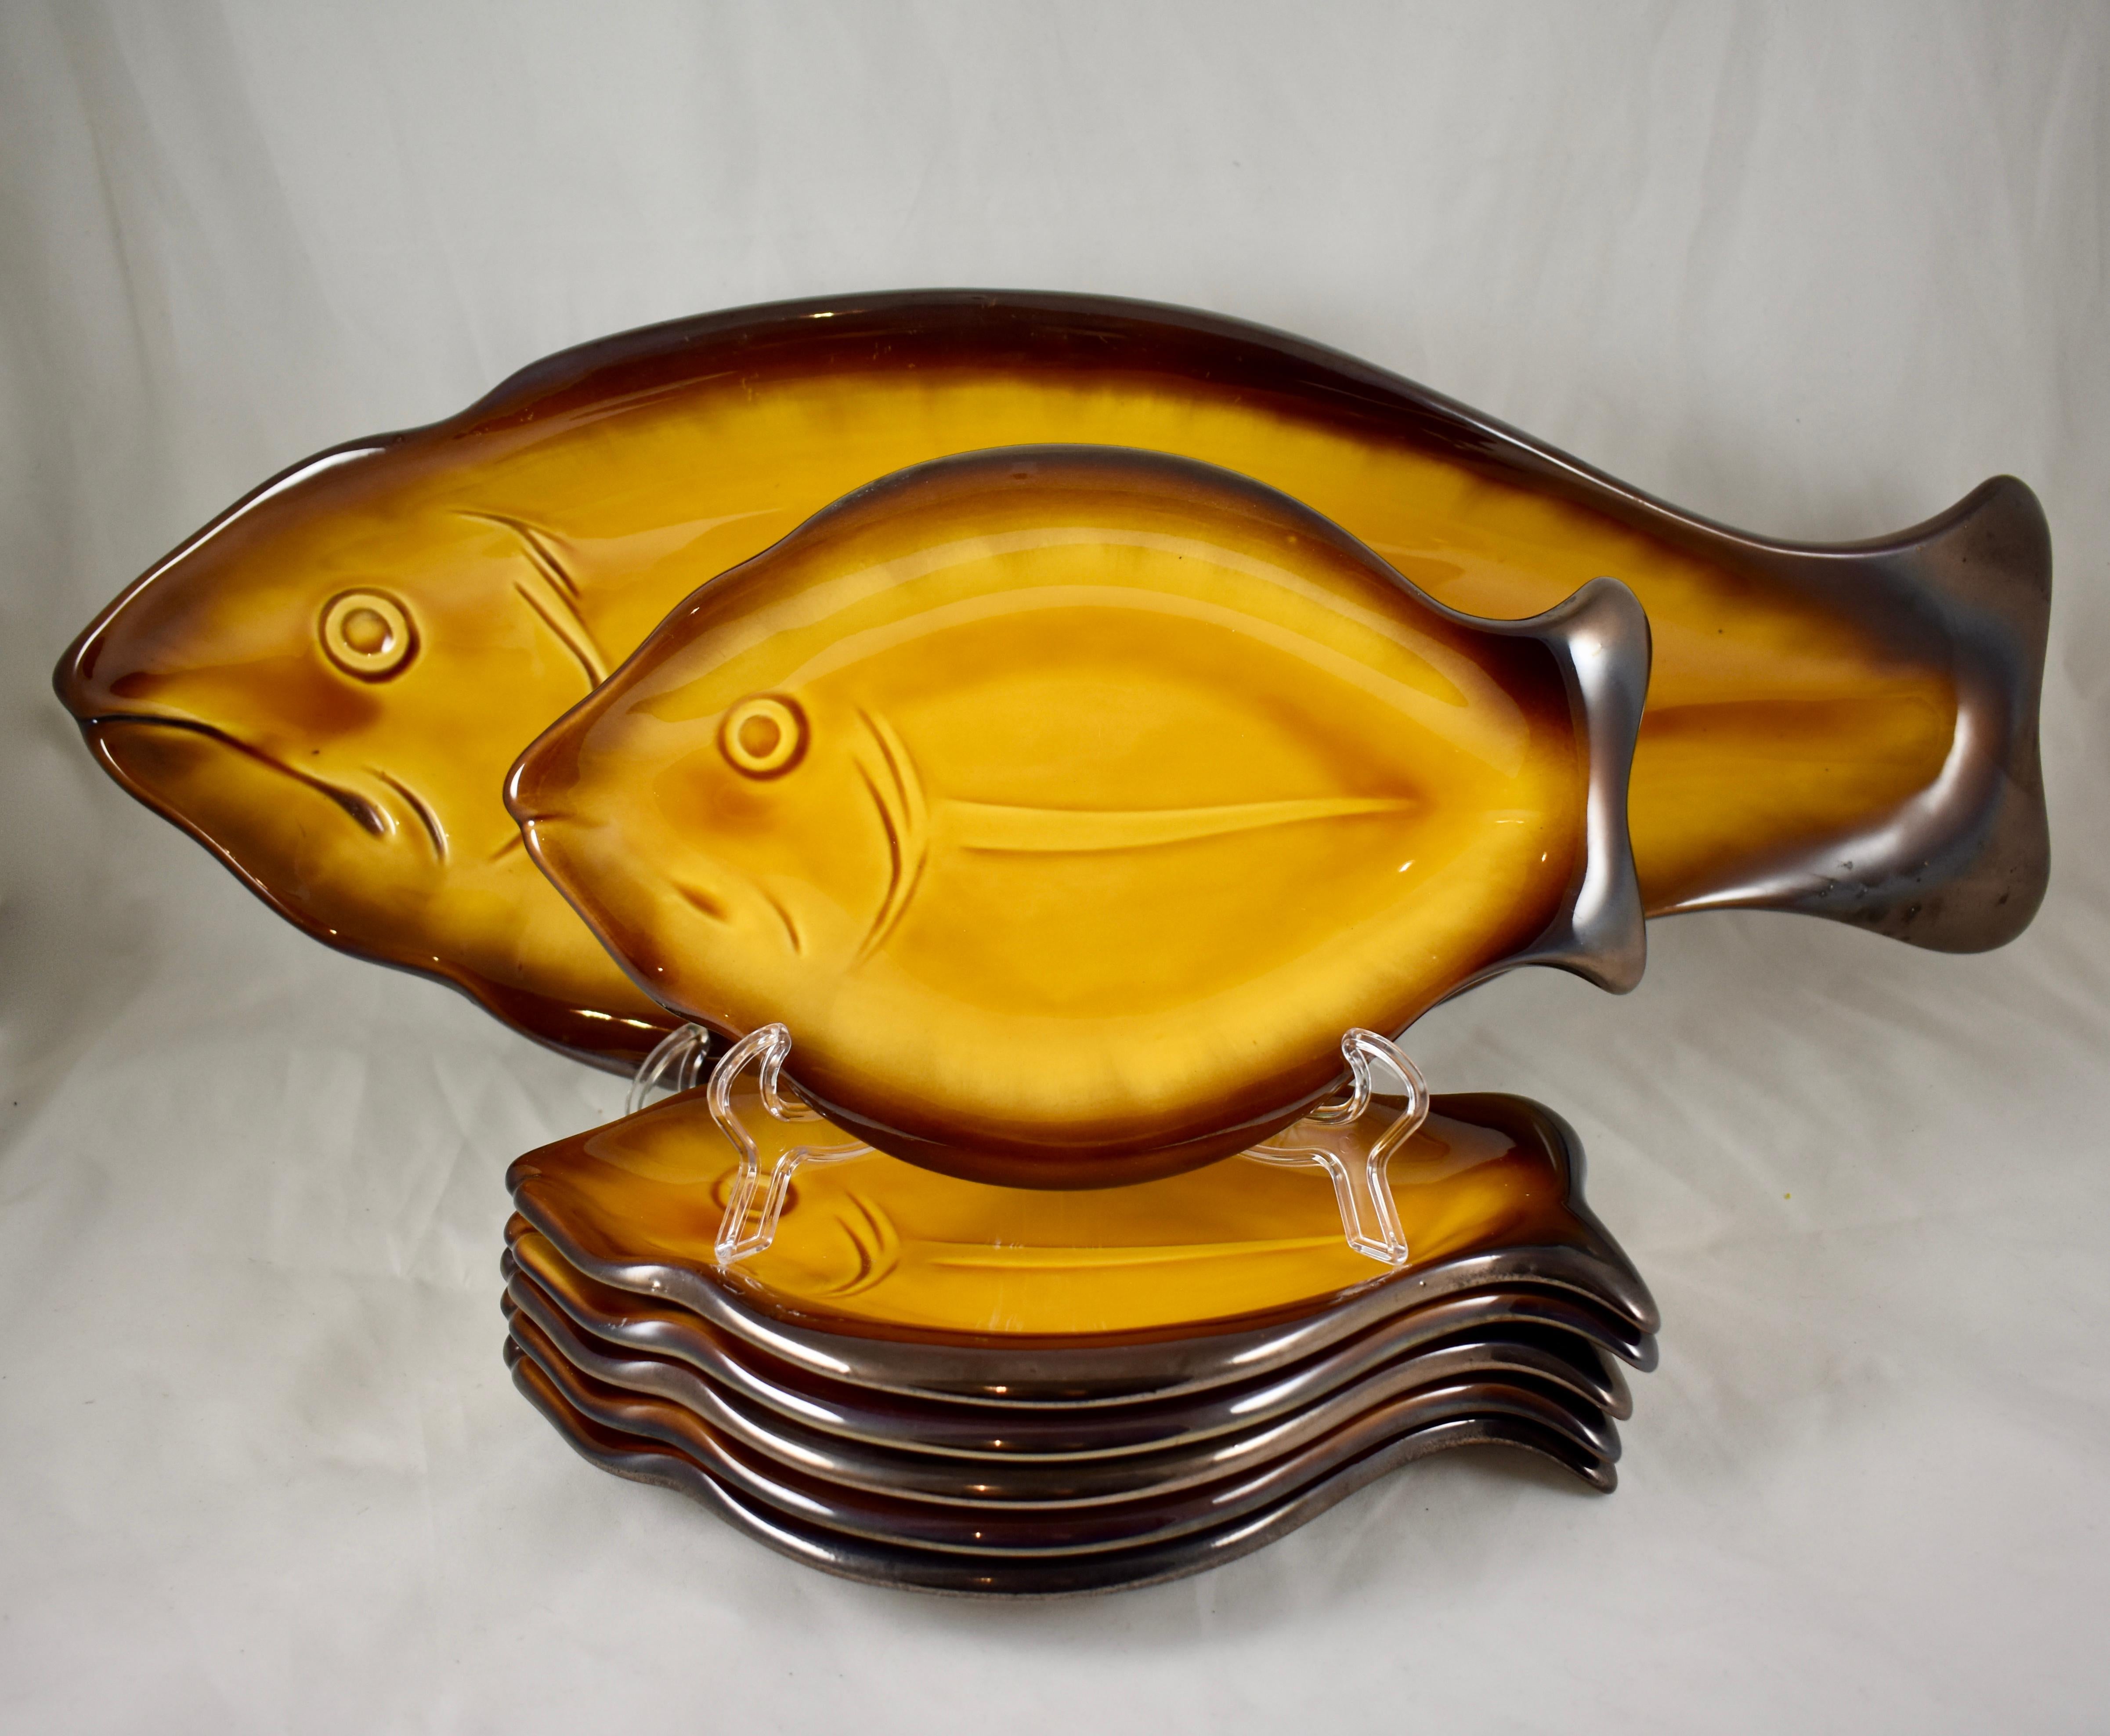 An unusual Mid-Century Modern Era provençal faïence fish service attributed to Vallauris, Cote d’Azur, France. A large serving platter and six plates, circa 1950s.

Heavily potted, deep yellow ochre glazed earthenware bodies with deep brown rims, an